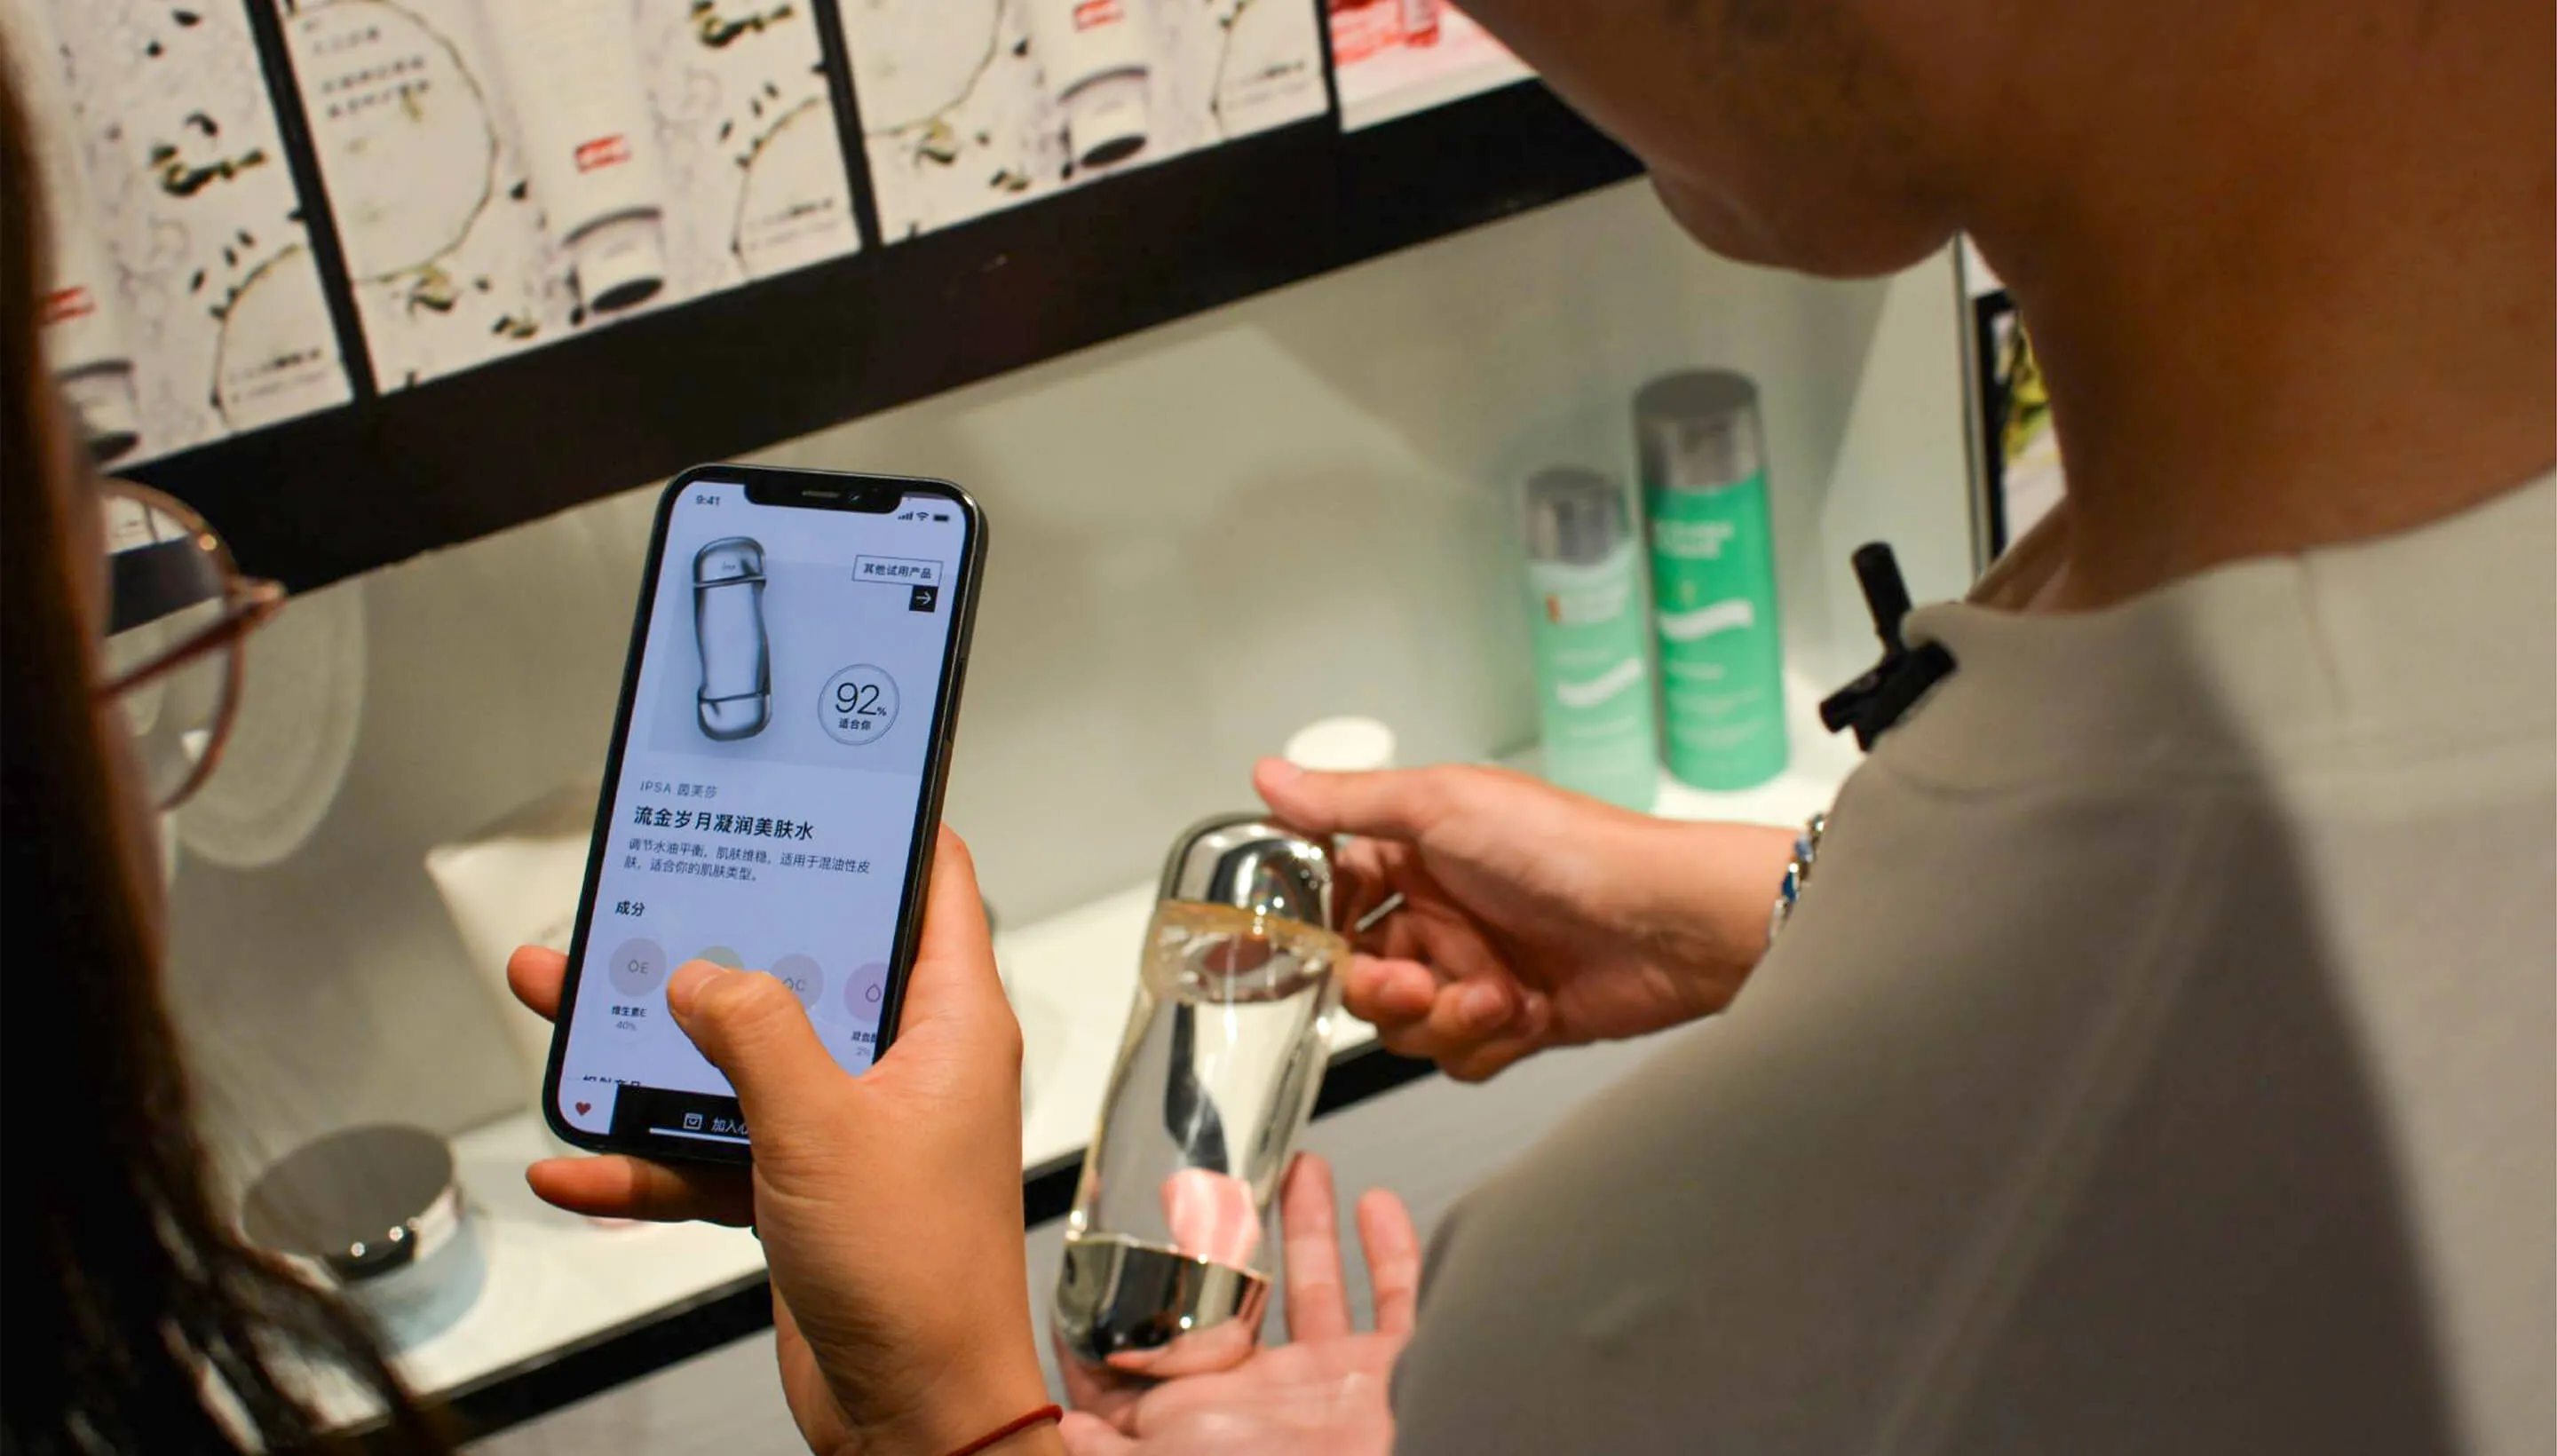 A person scans a perfume bottle with their phone in this cashless Sephora store